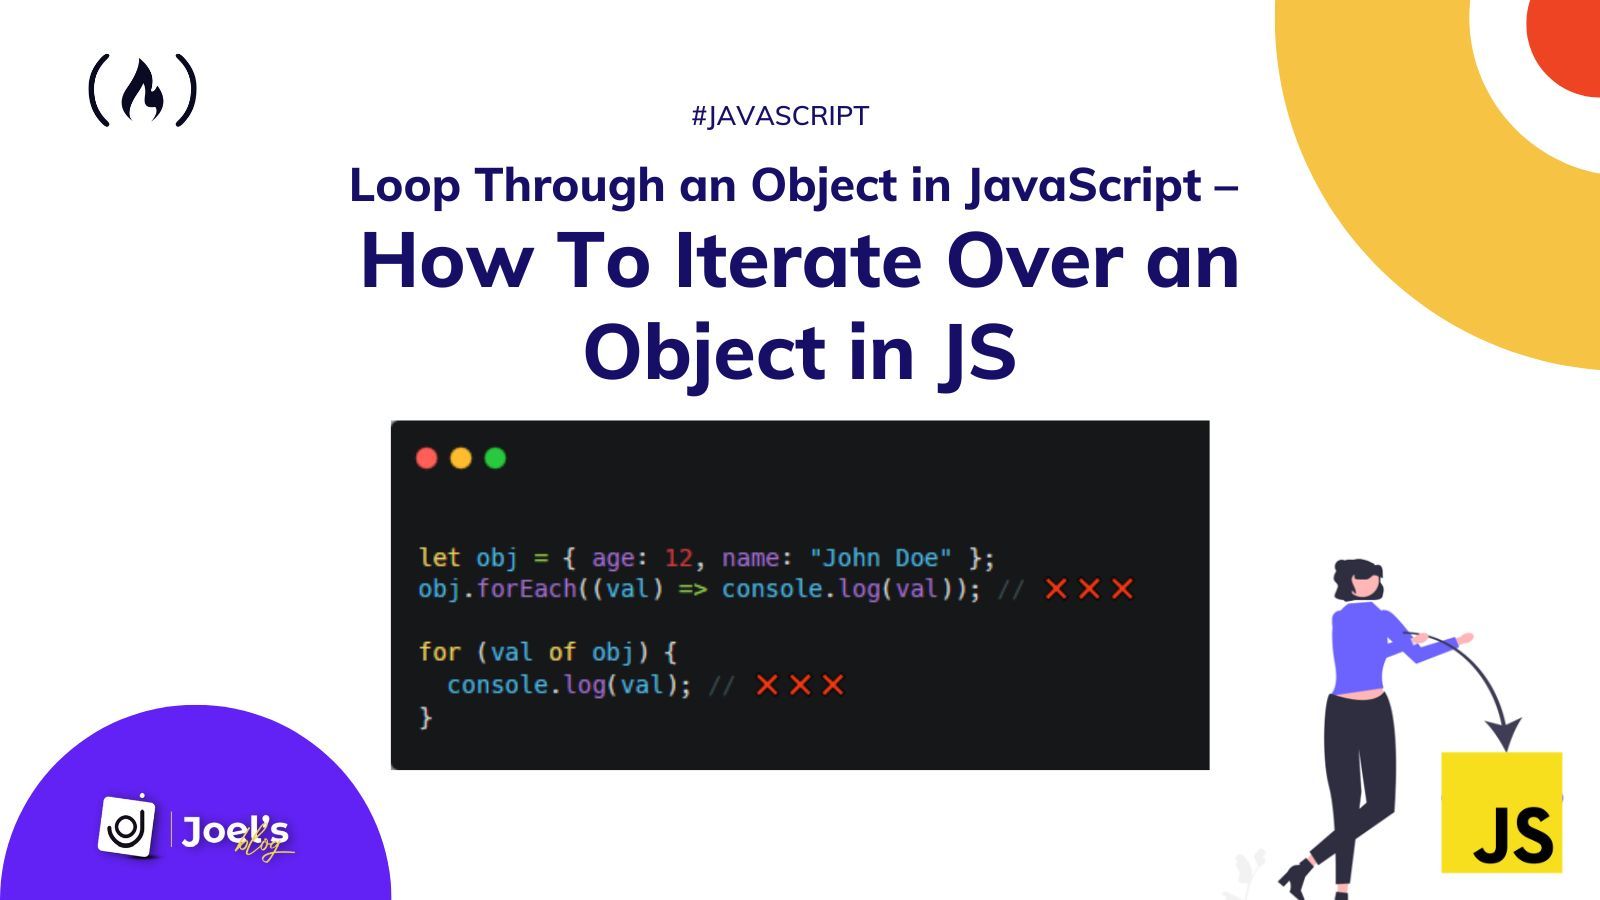 Loop Through an Object in JavaScript – How to Iterate Over an Object in JS